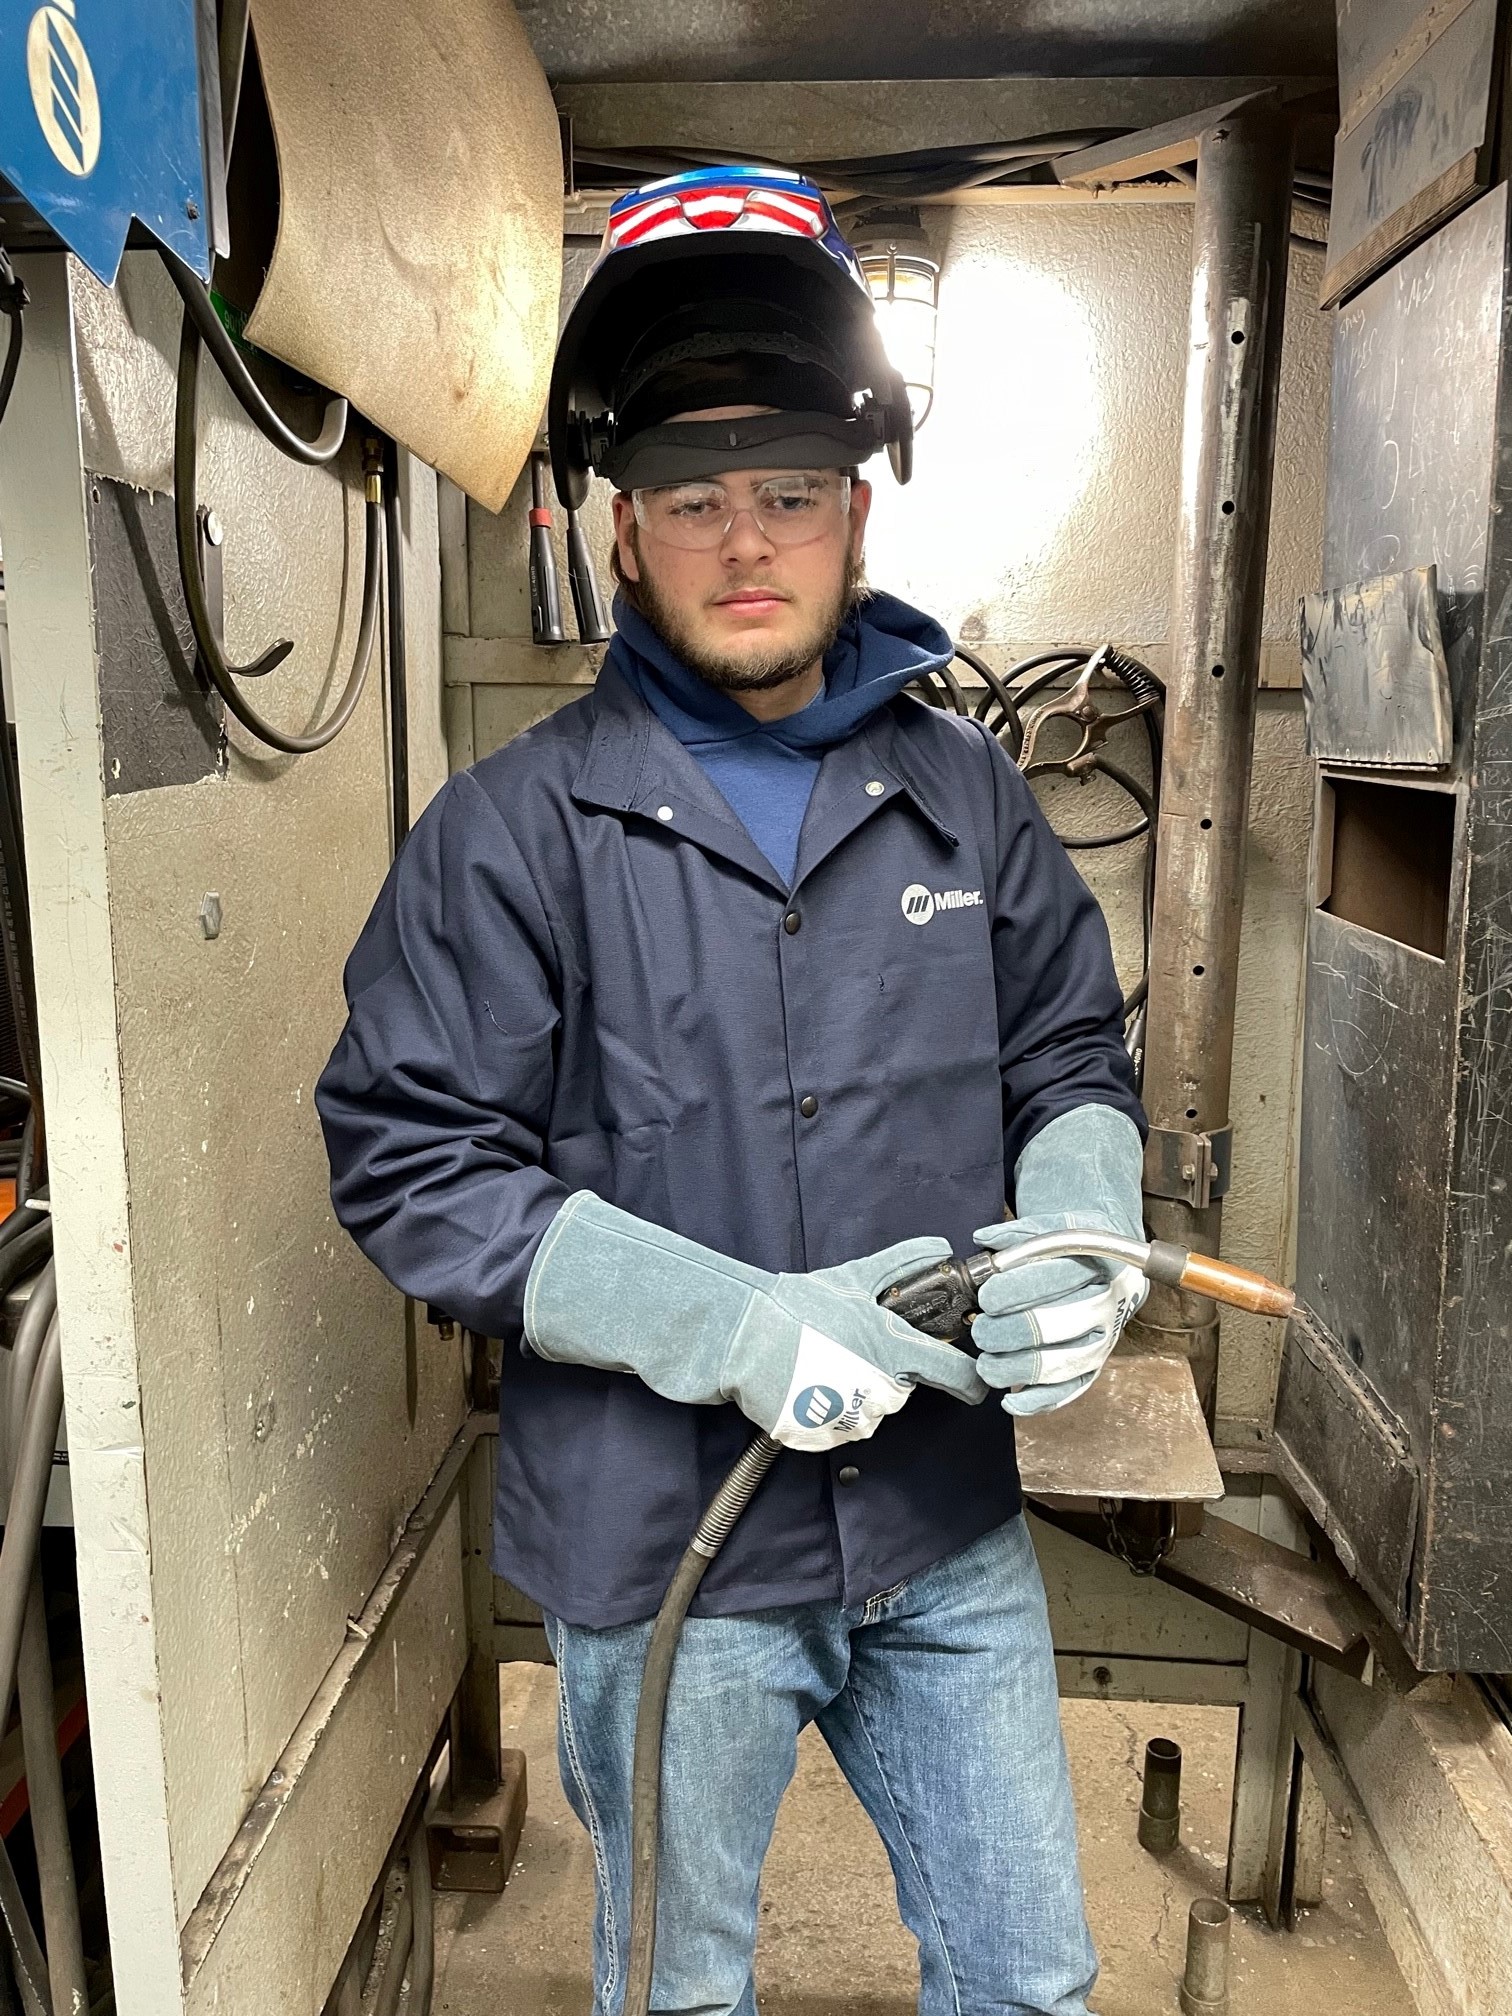 Welding student in protective gear